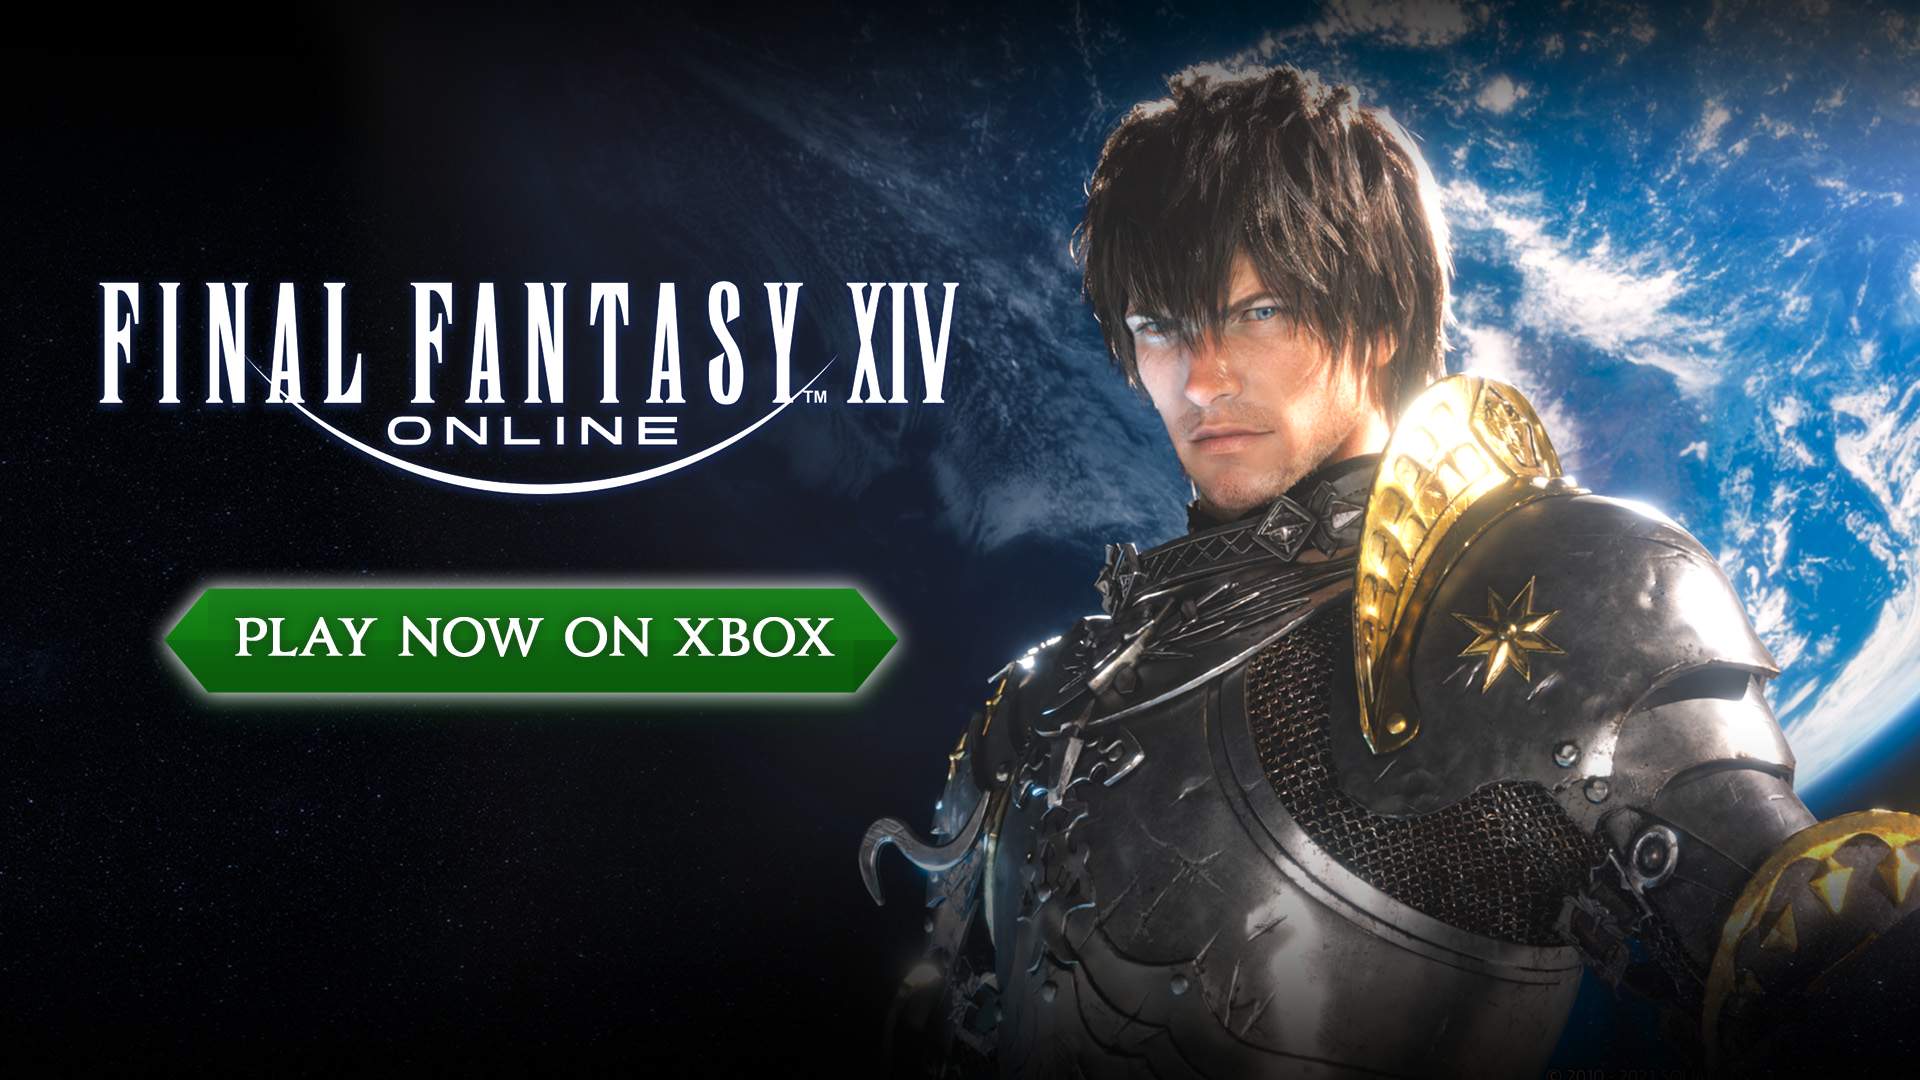 FINAL FANTASY XIV Online is available now on Xbox Series X|S!